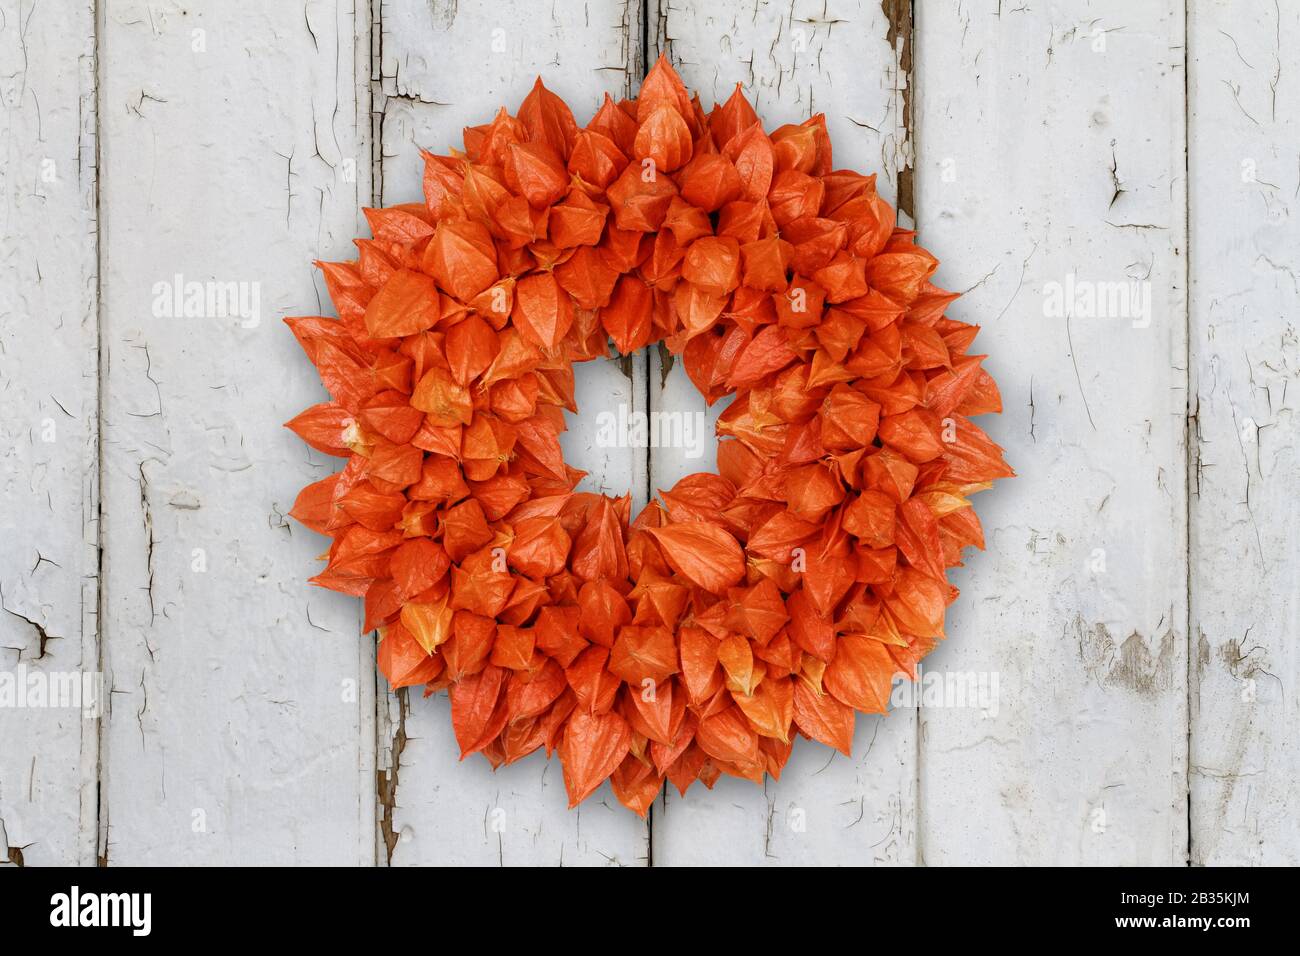 Autumnal Decoration Wreath with Physalis on grunge background Stock Photo